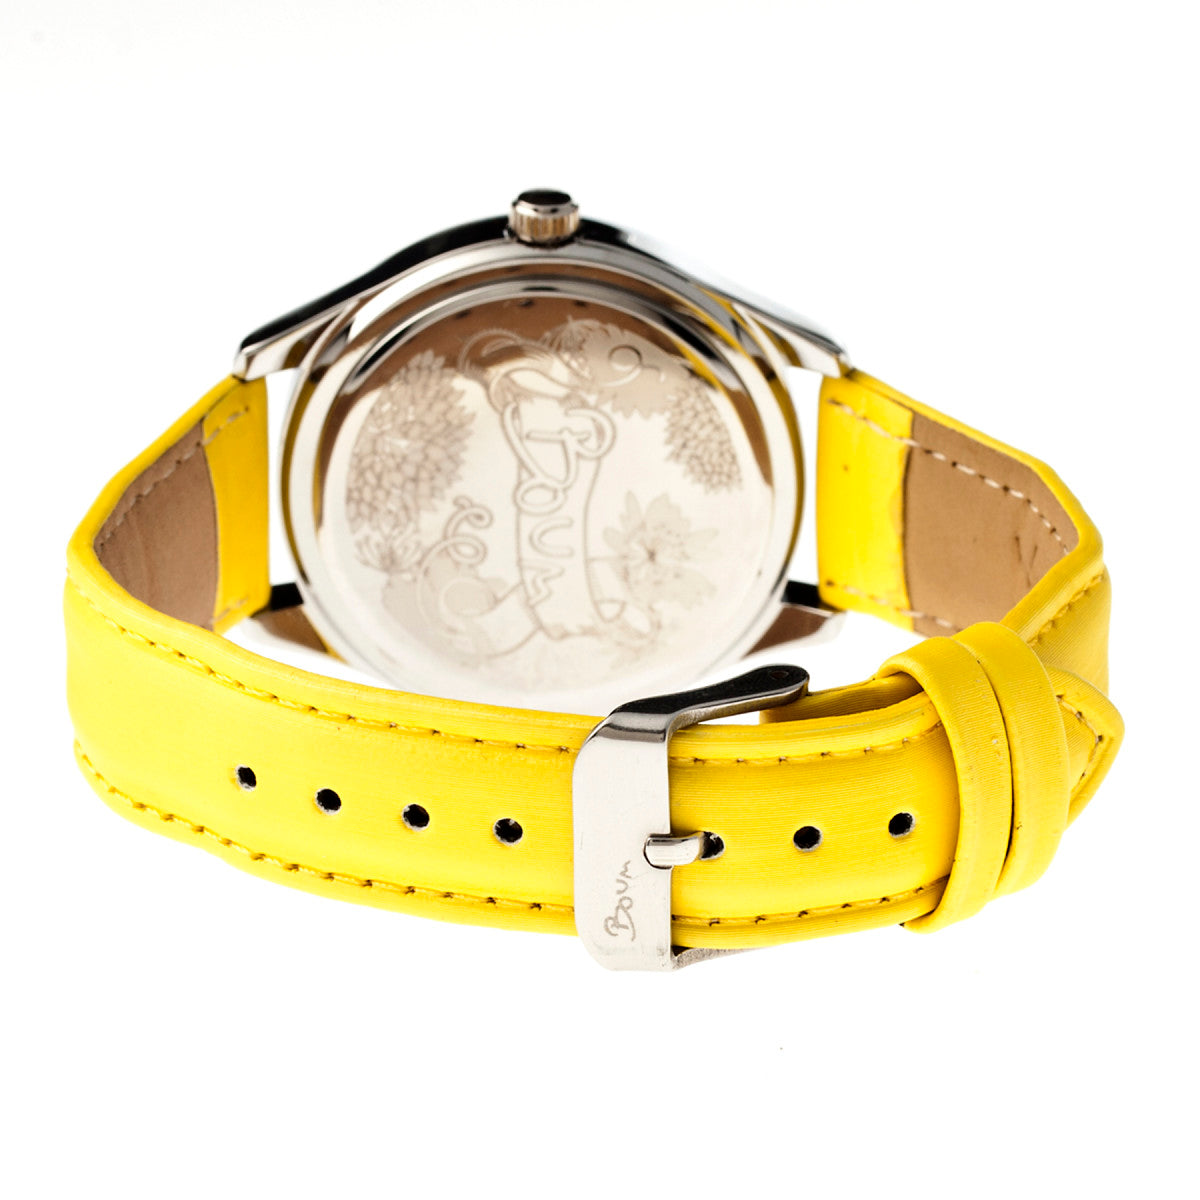 Boum Chic Mirror-Dial Leather-Band Ladies Watch - Silver/Yellow - BOUBM2002